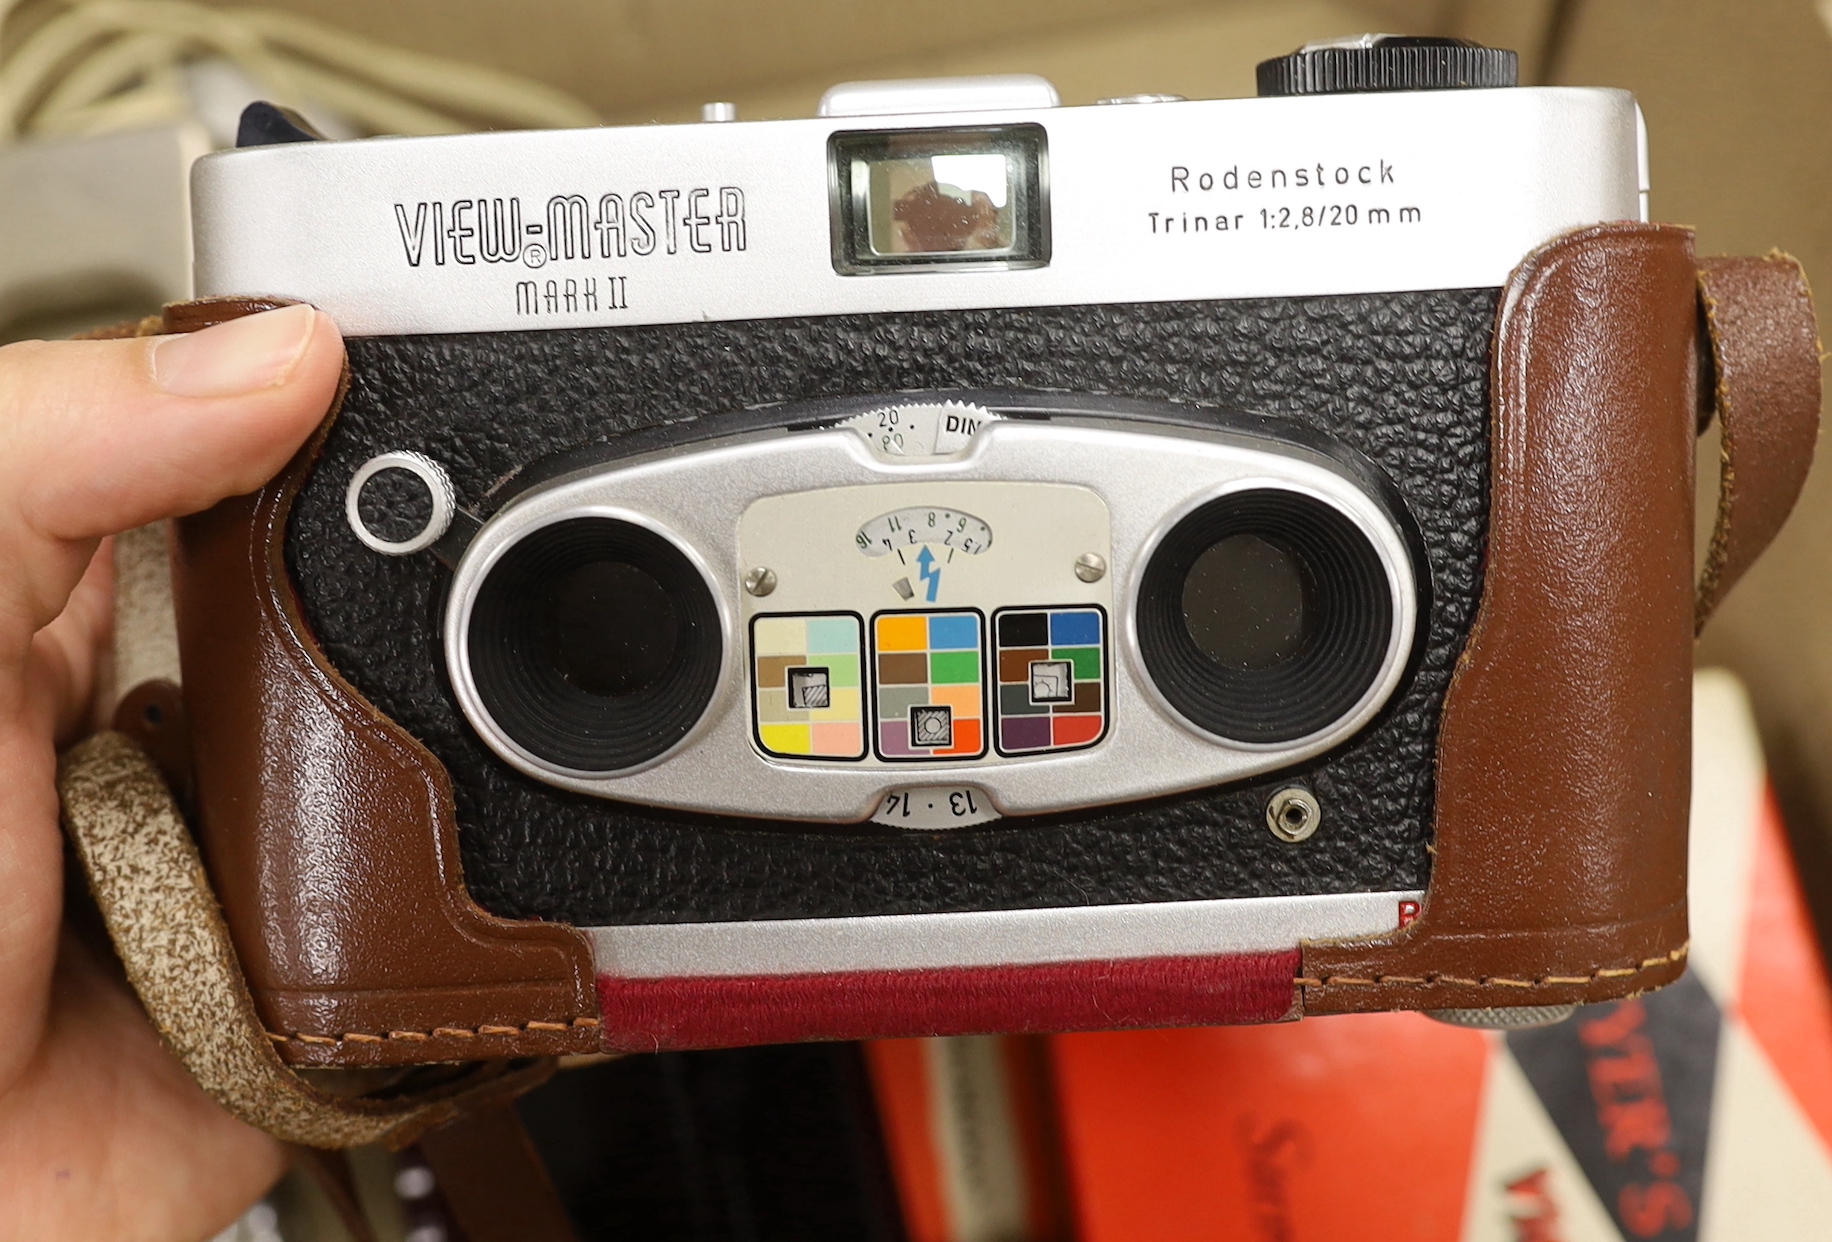 A View-Master Personal stereo camera and a View-Master Mark II stereo camera with Rodenstock lens, leather case, instructions and box, together with a film cutter